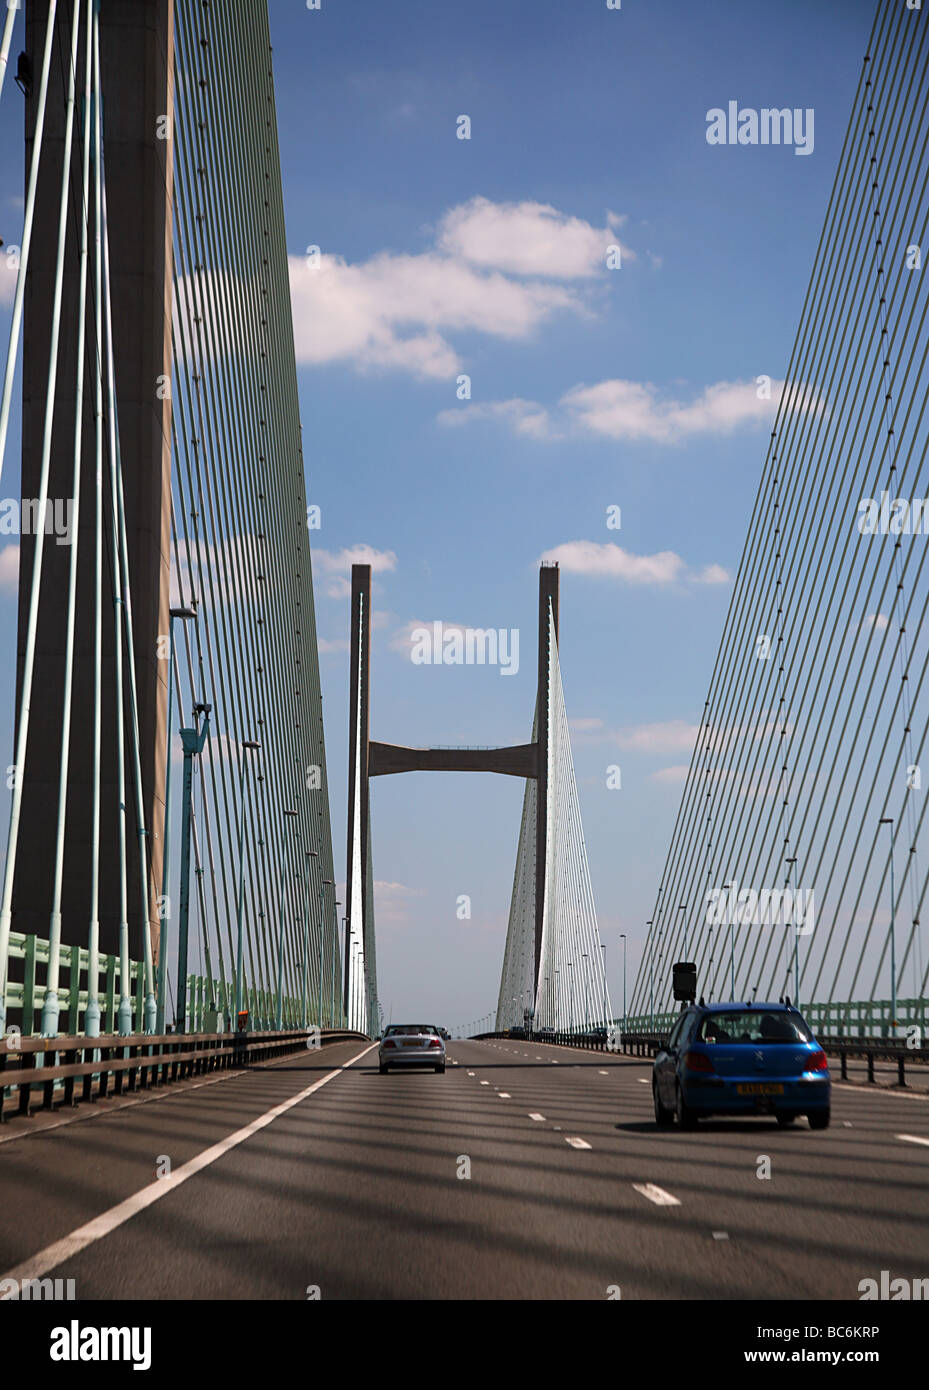 Second Severn Crossing - A spectacular bridge carrying the M4 motorway across River Severn Estuary Stock Photo